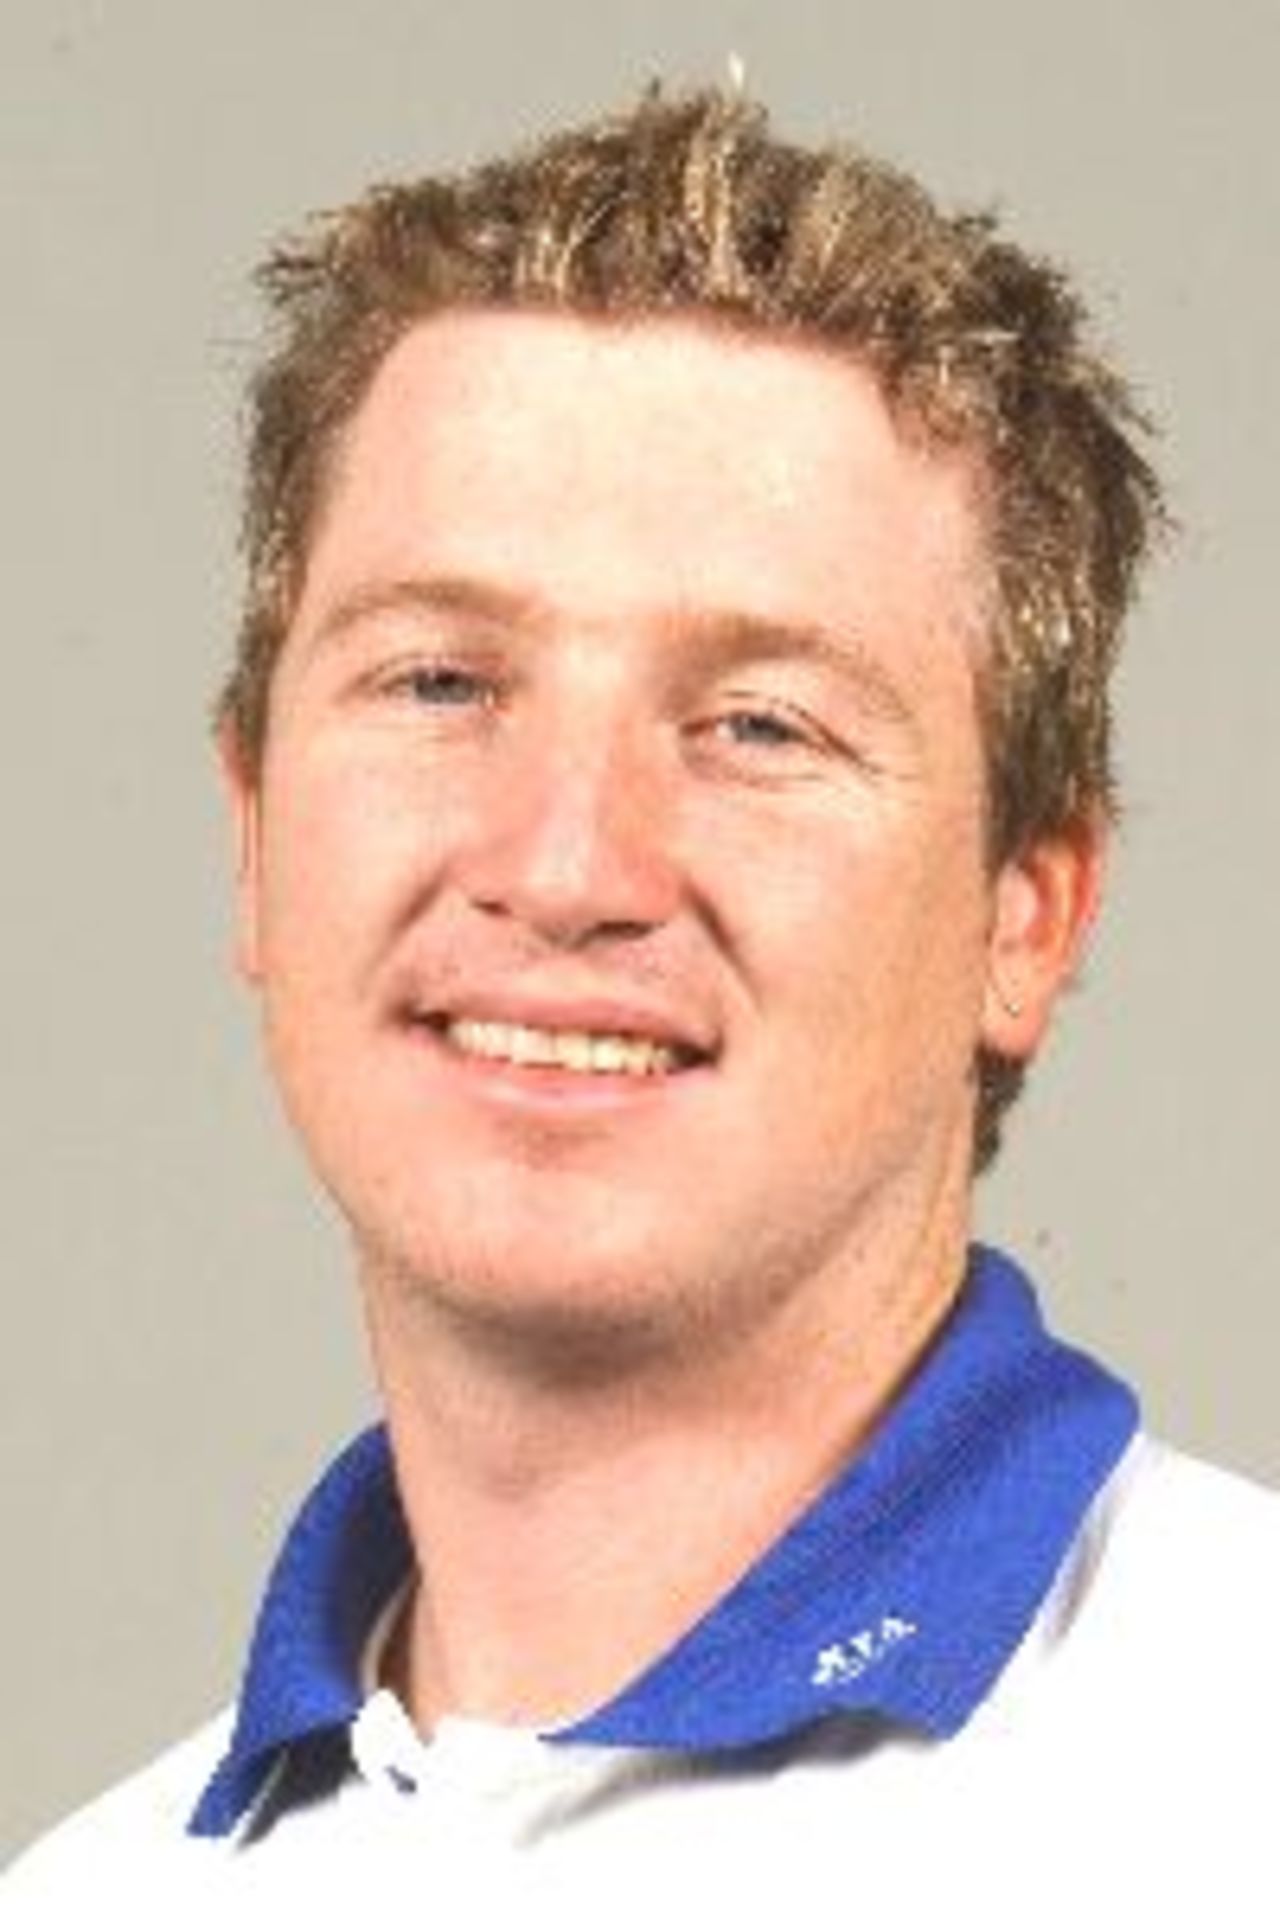 Portrait of Brad Haddin, New South Wales, August 2002